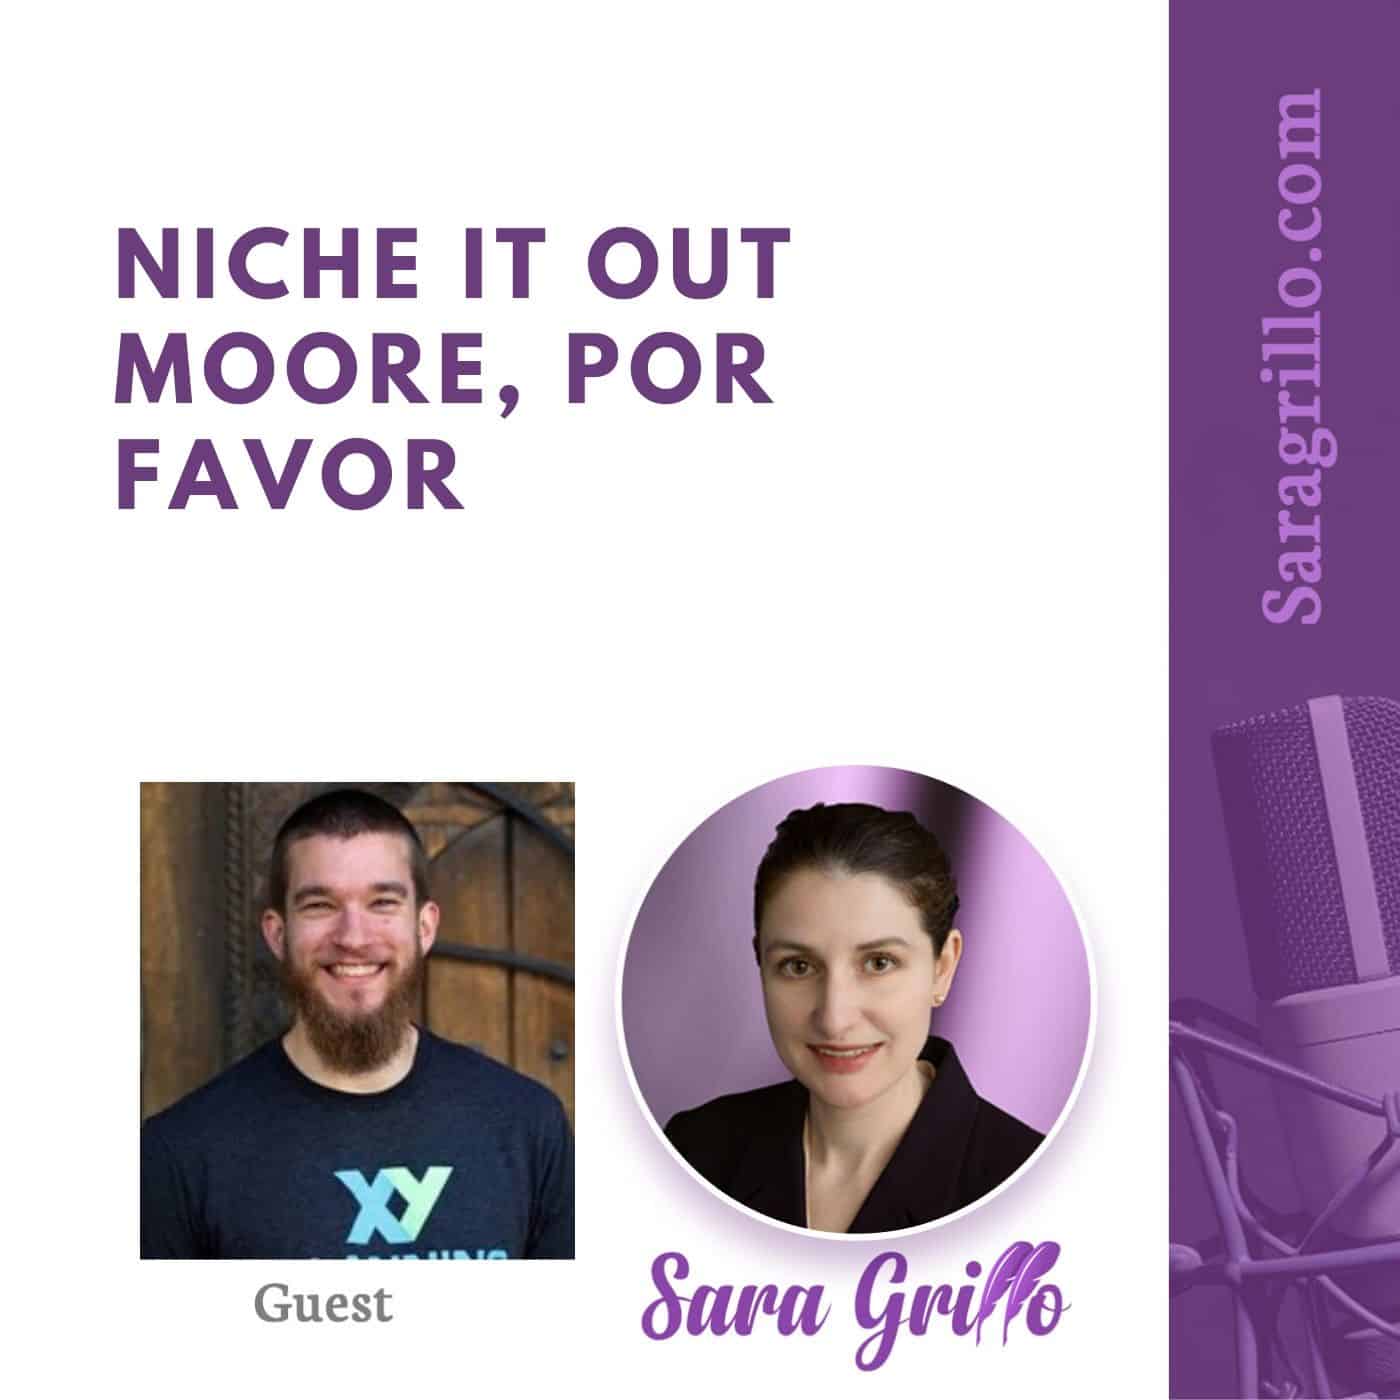 This podcast talks about financial advisor niche marketing.